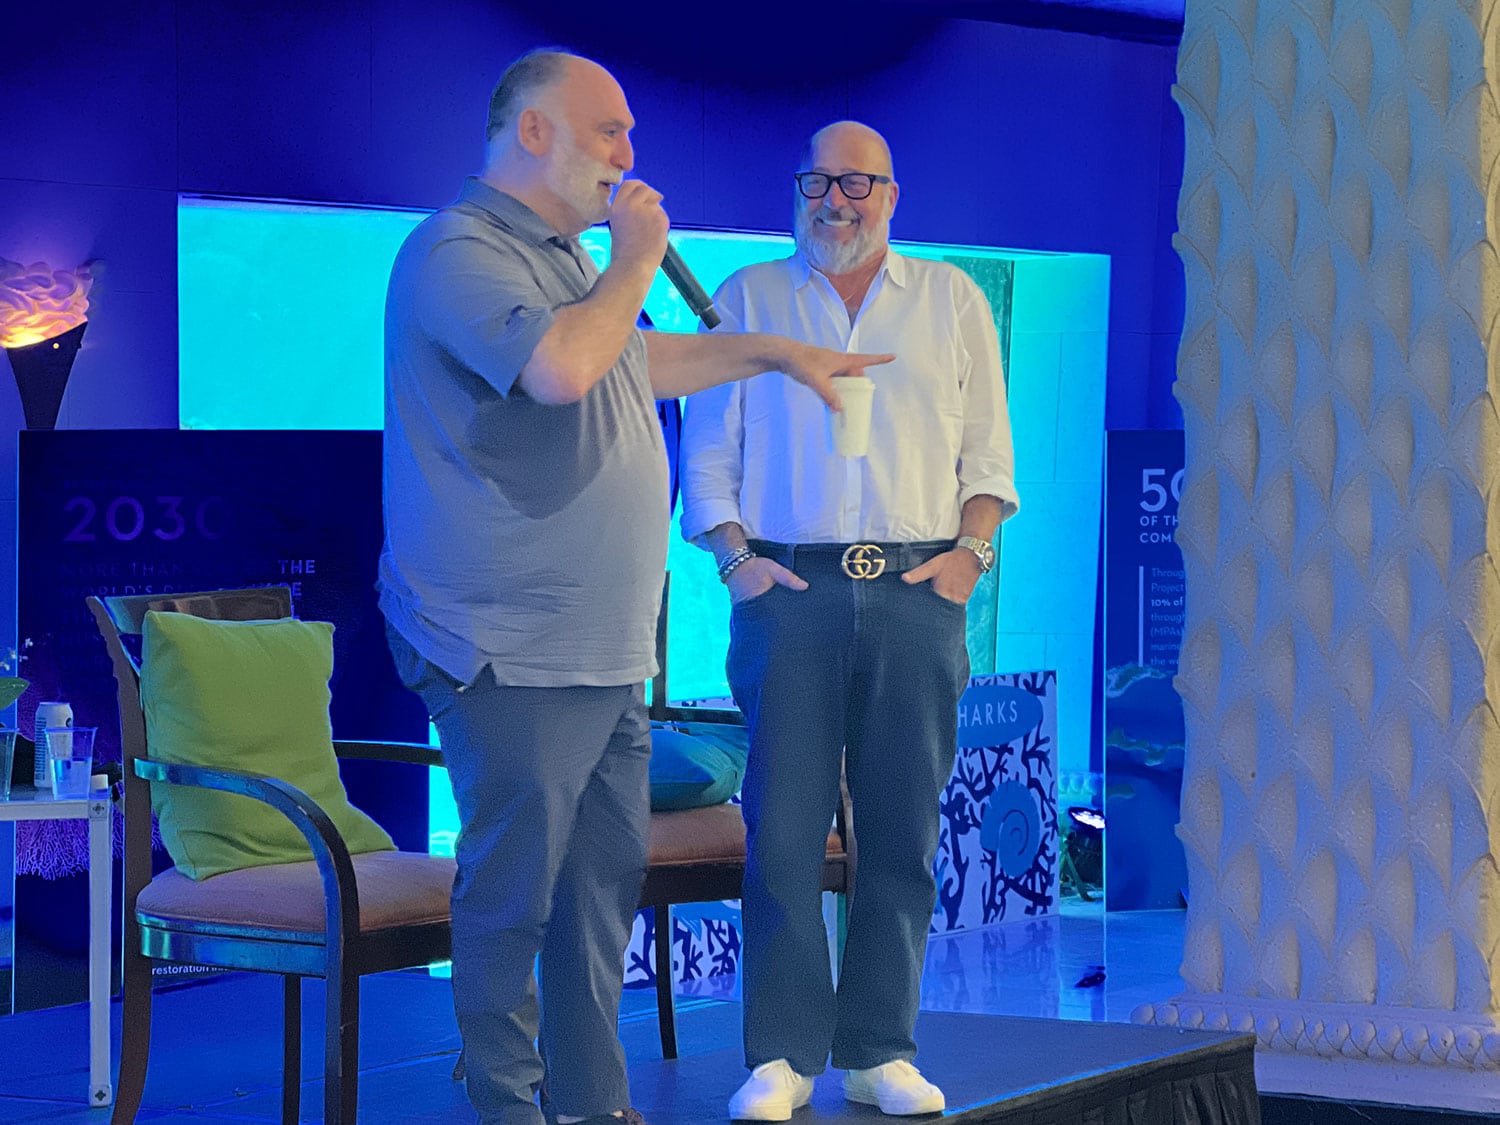 Chefs José Andrés and Andrew Zimmern led an intimate Saturday morning conversation at the inaugural Nassau Paradise Island Wine and Food Festival at Atlantis Paradise Island.